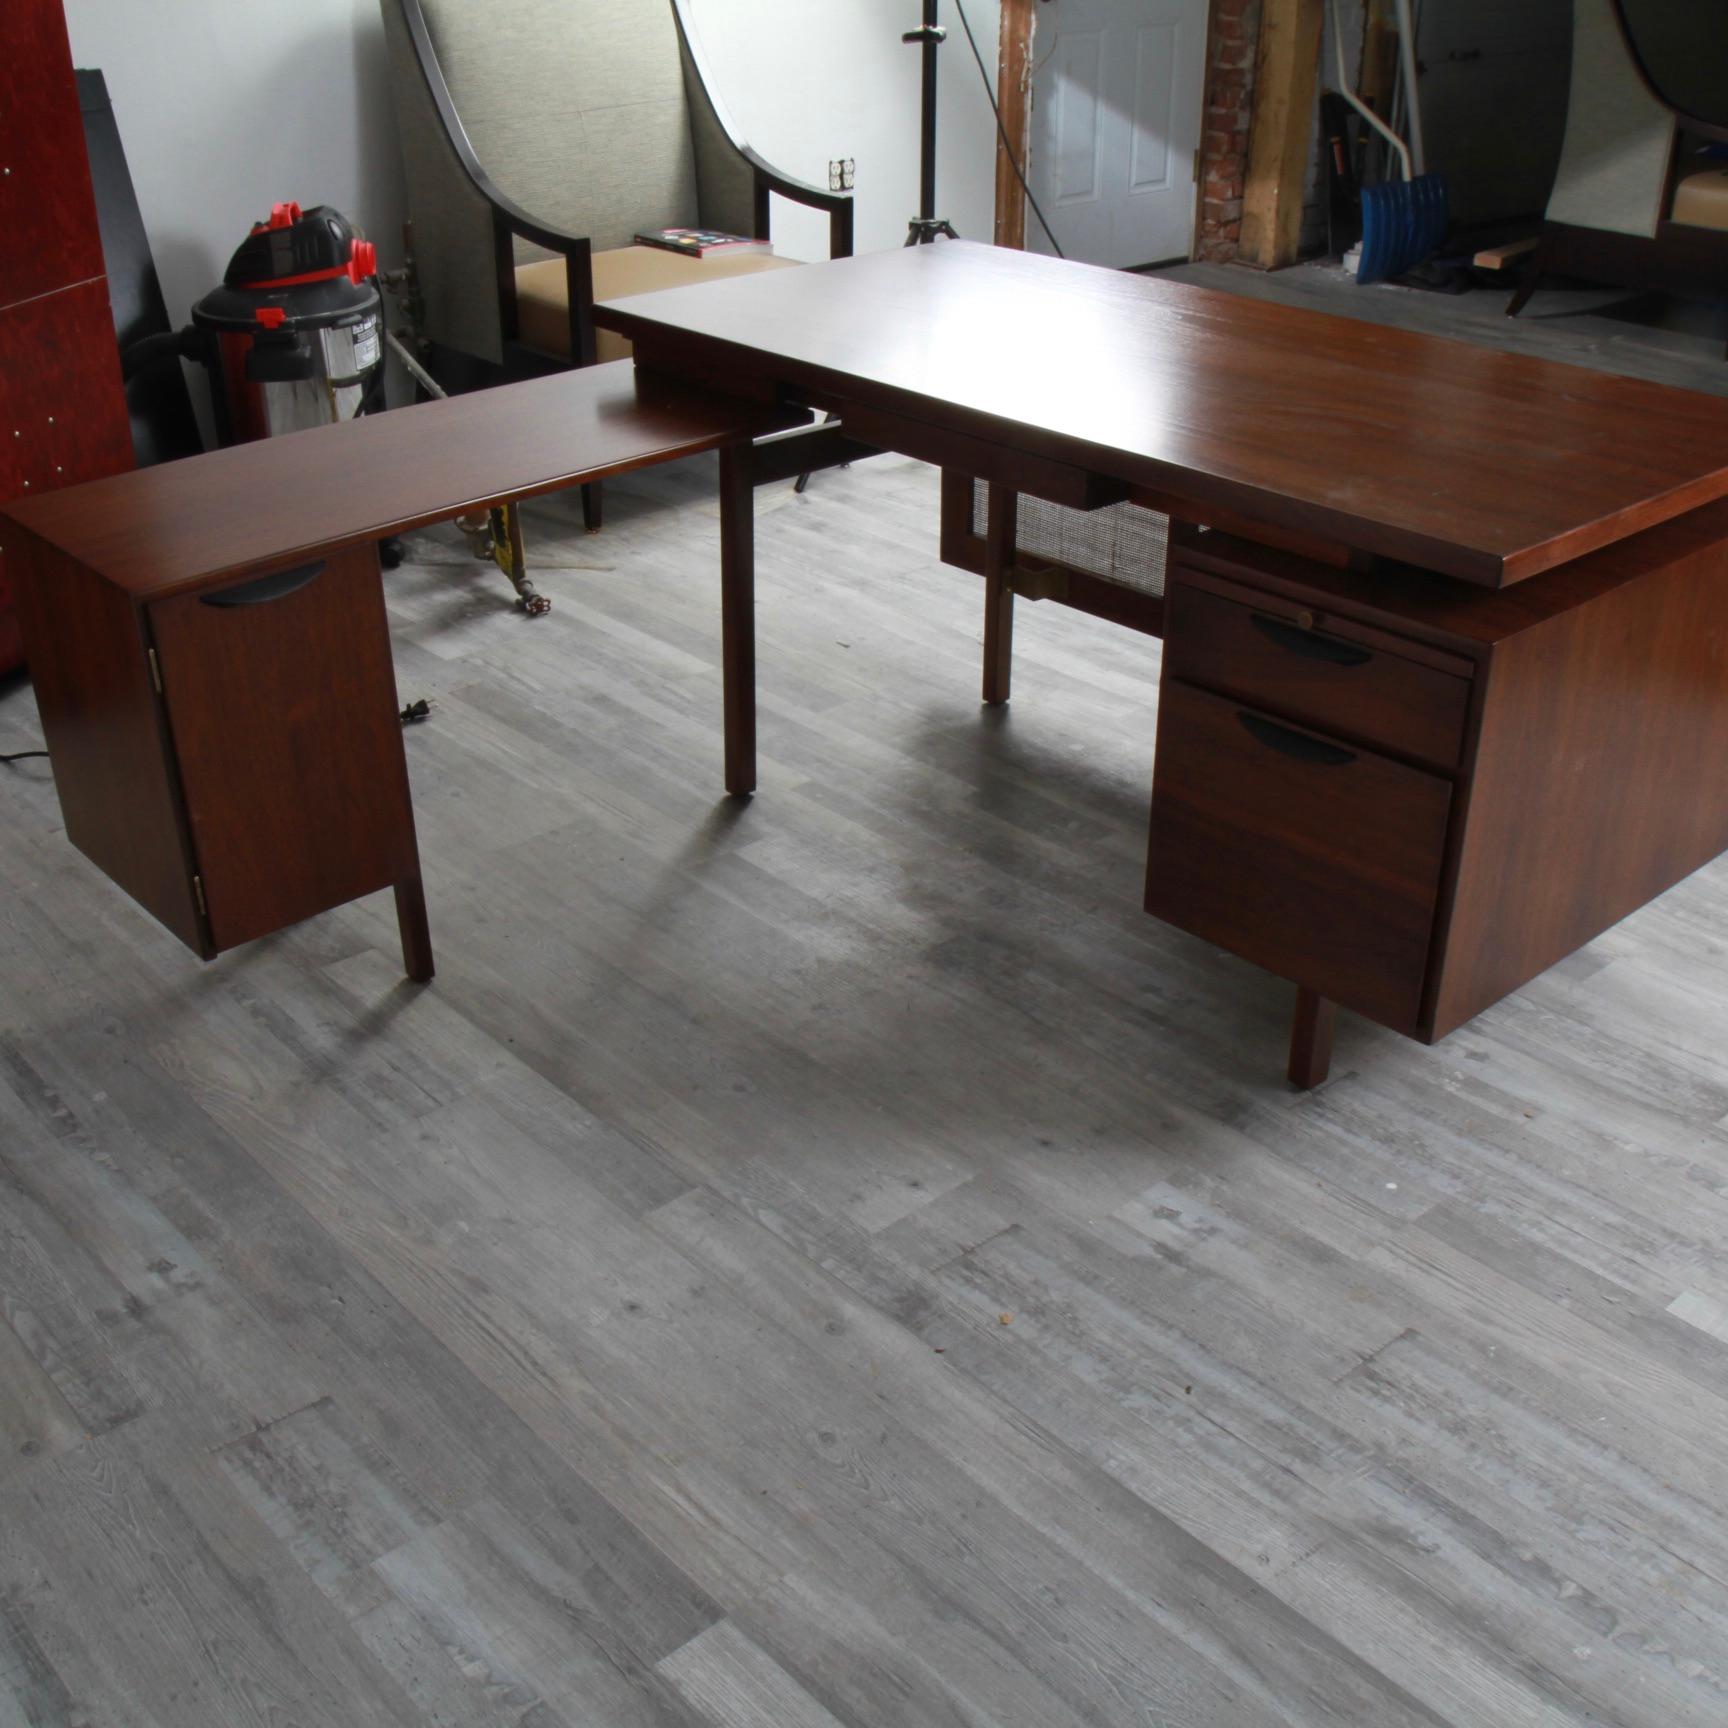 Jens Risom designed a nice variety of desks over the years, but this may be one of the more rare survivors from the sixties. Professionally refinished in its original walnut finish with the cane privacy screen newly re-caned. Shorter return comes